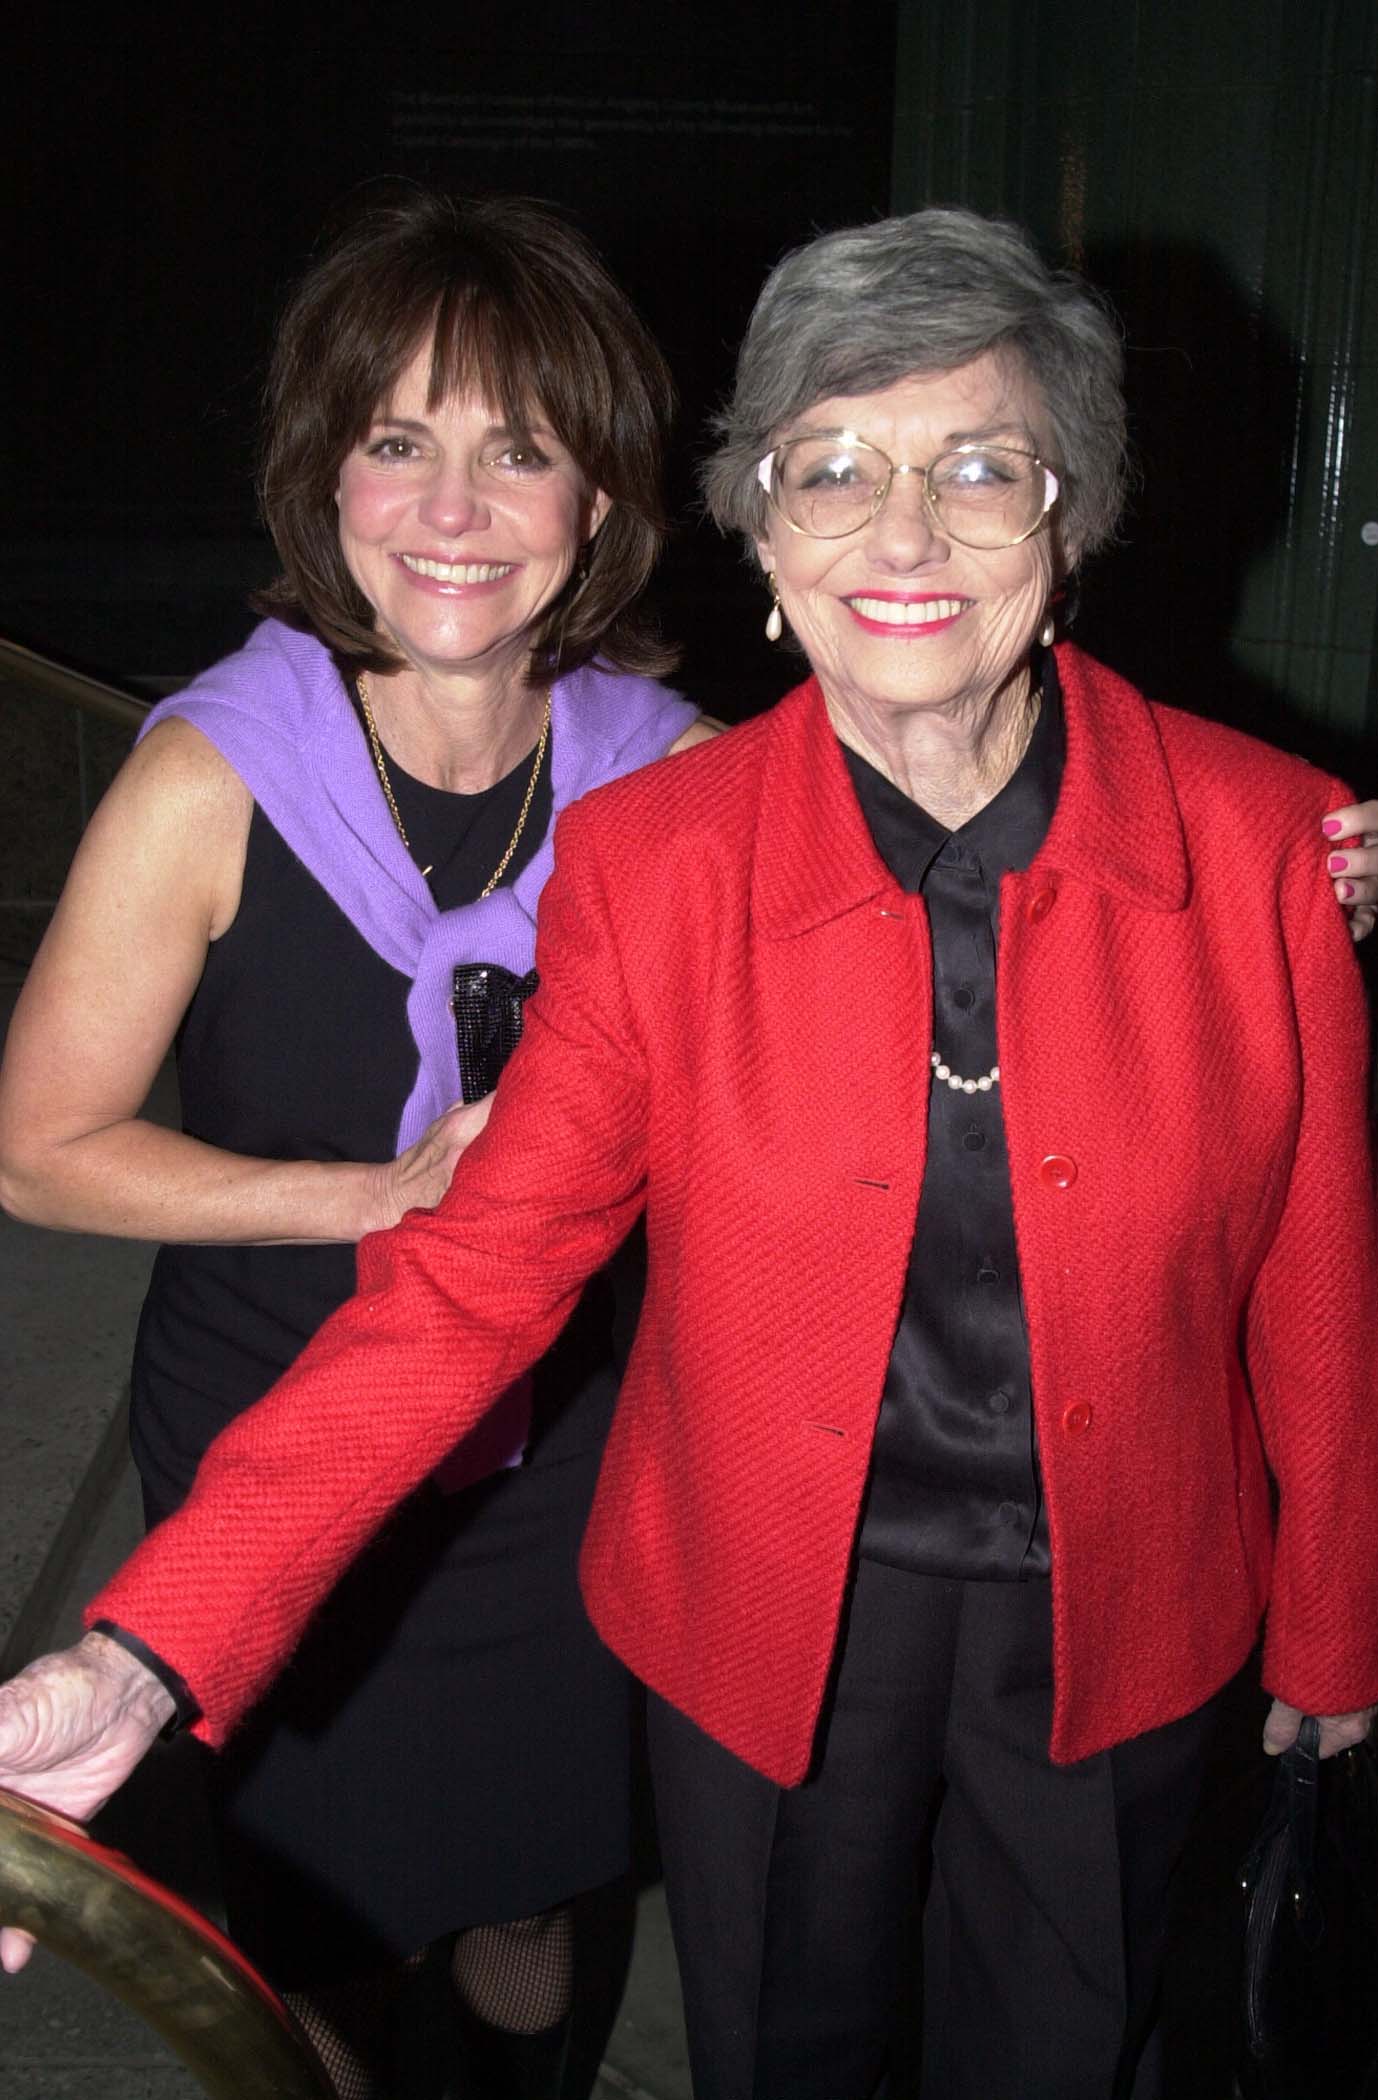 Sally Field and her mother Margaret Field attend the premiere of the movie, "Beautiful" on September 25, 2000 ┃Source: Getty Images